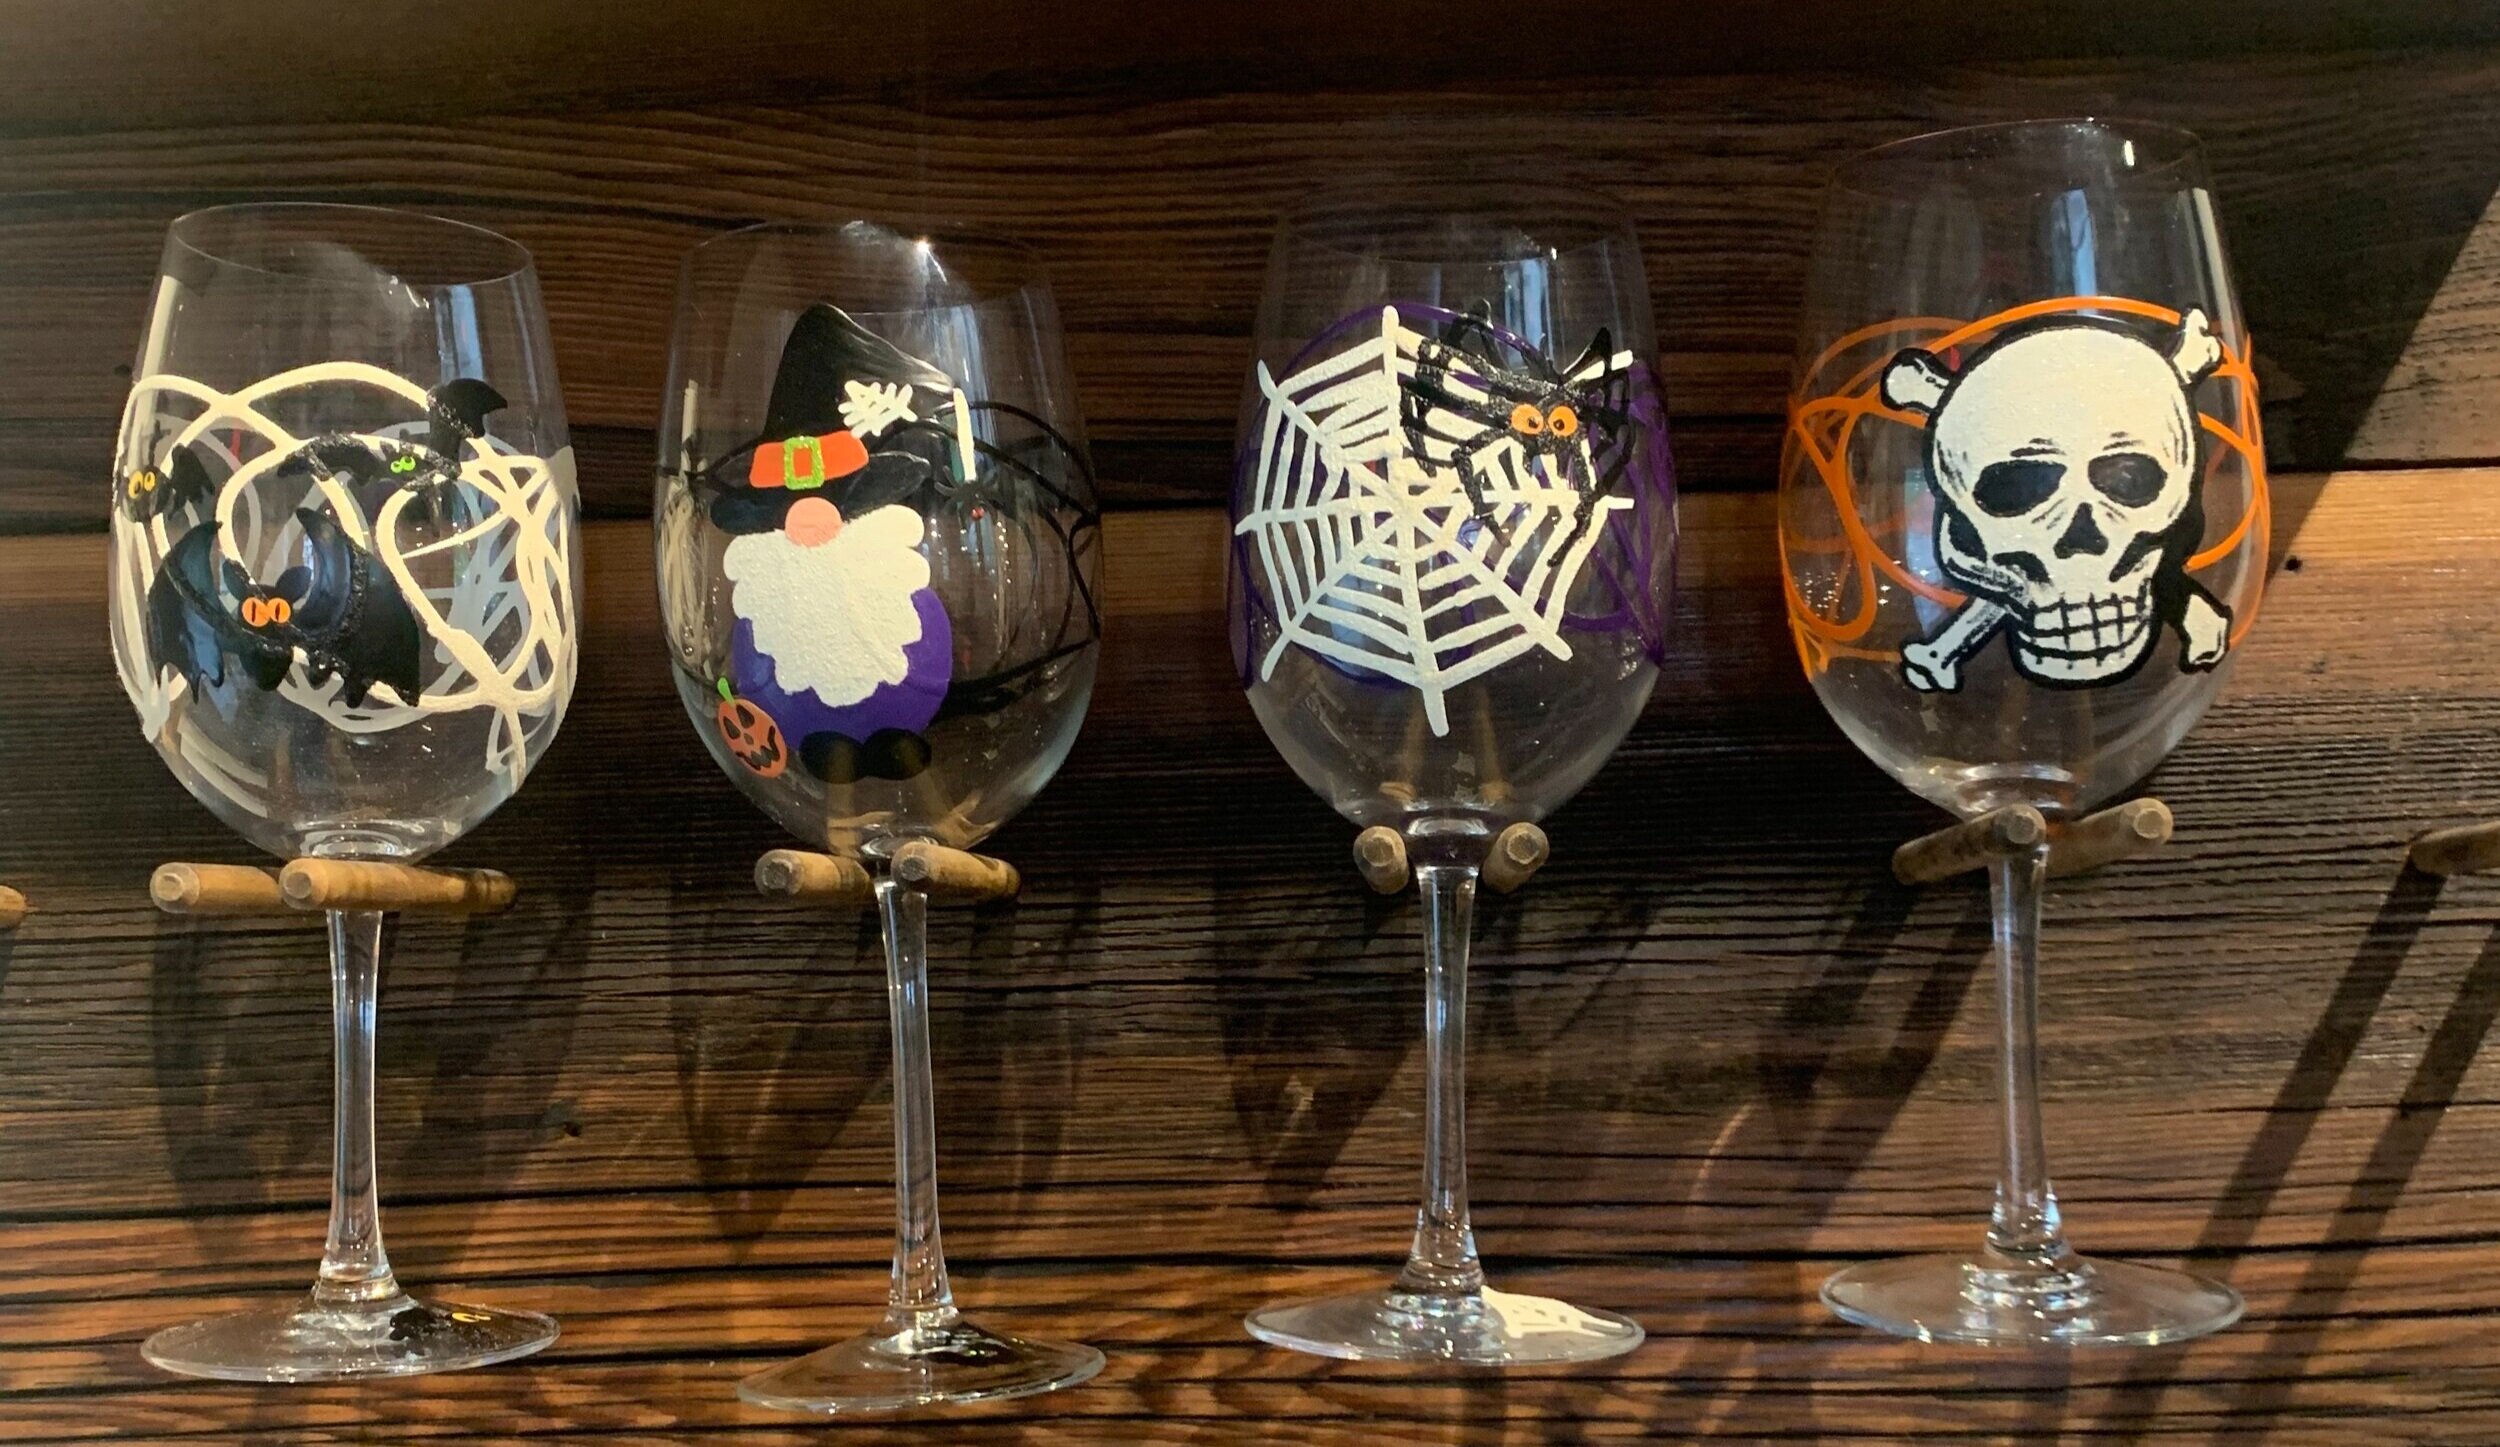 Frosty Hand Painted Wine Glasses set of 4 